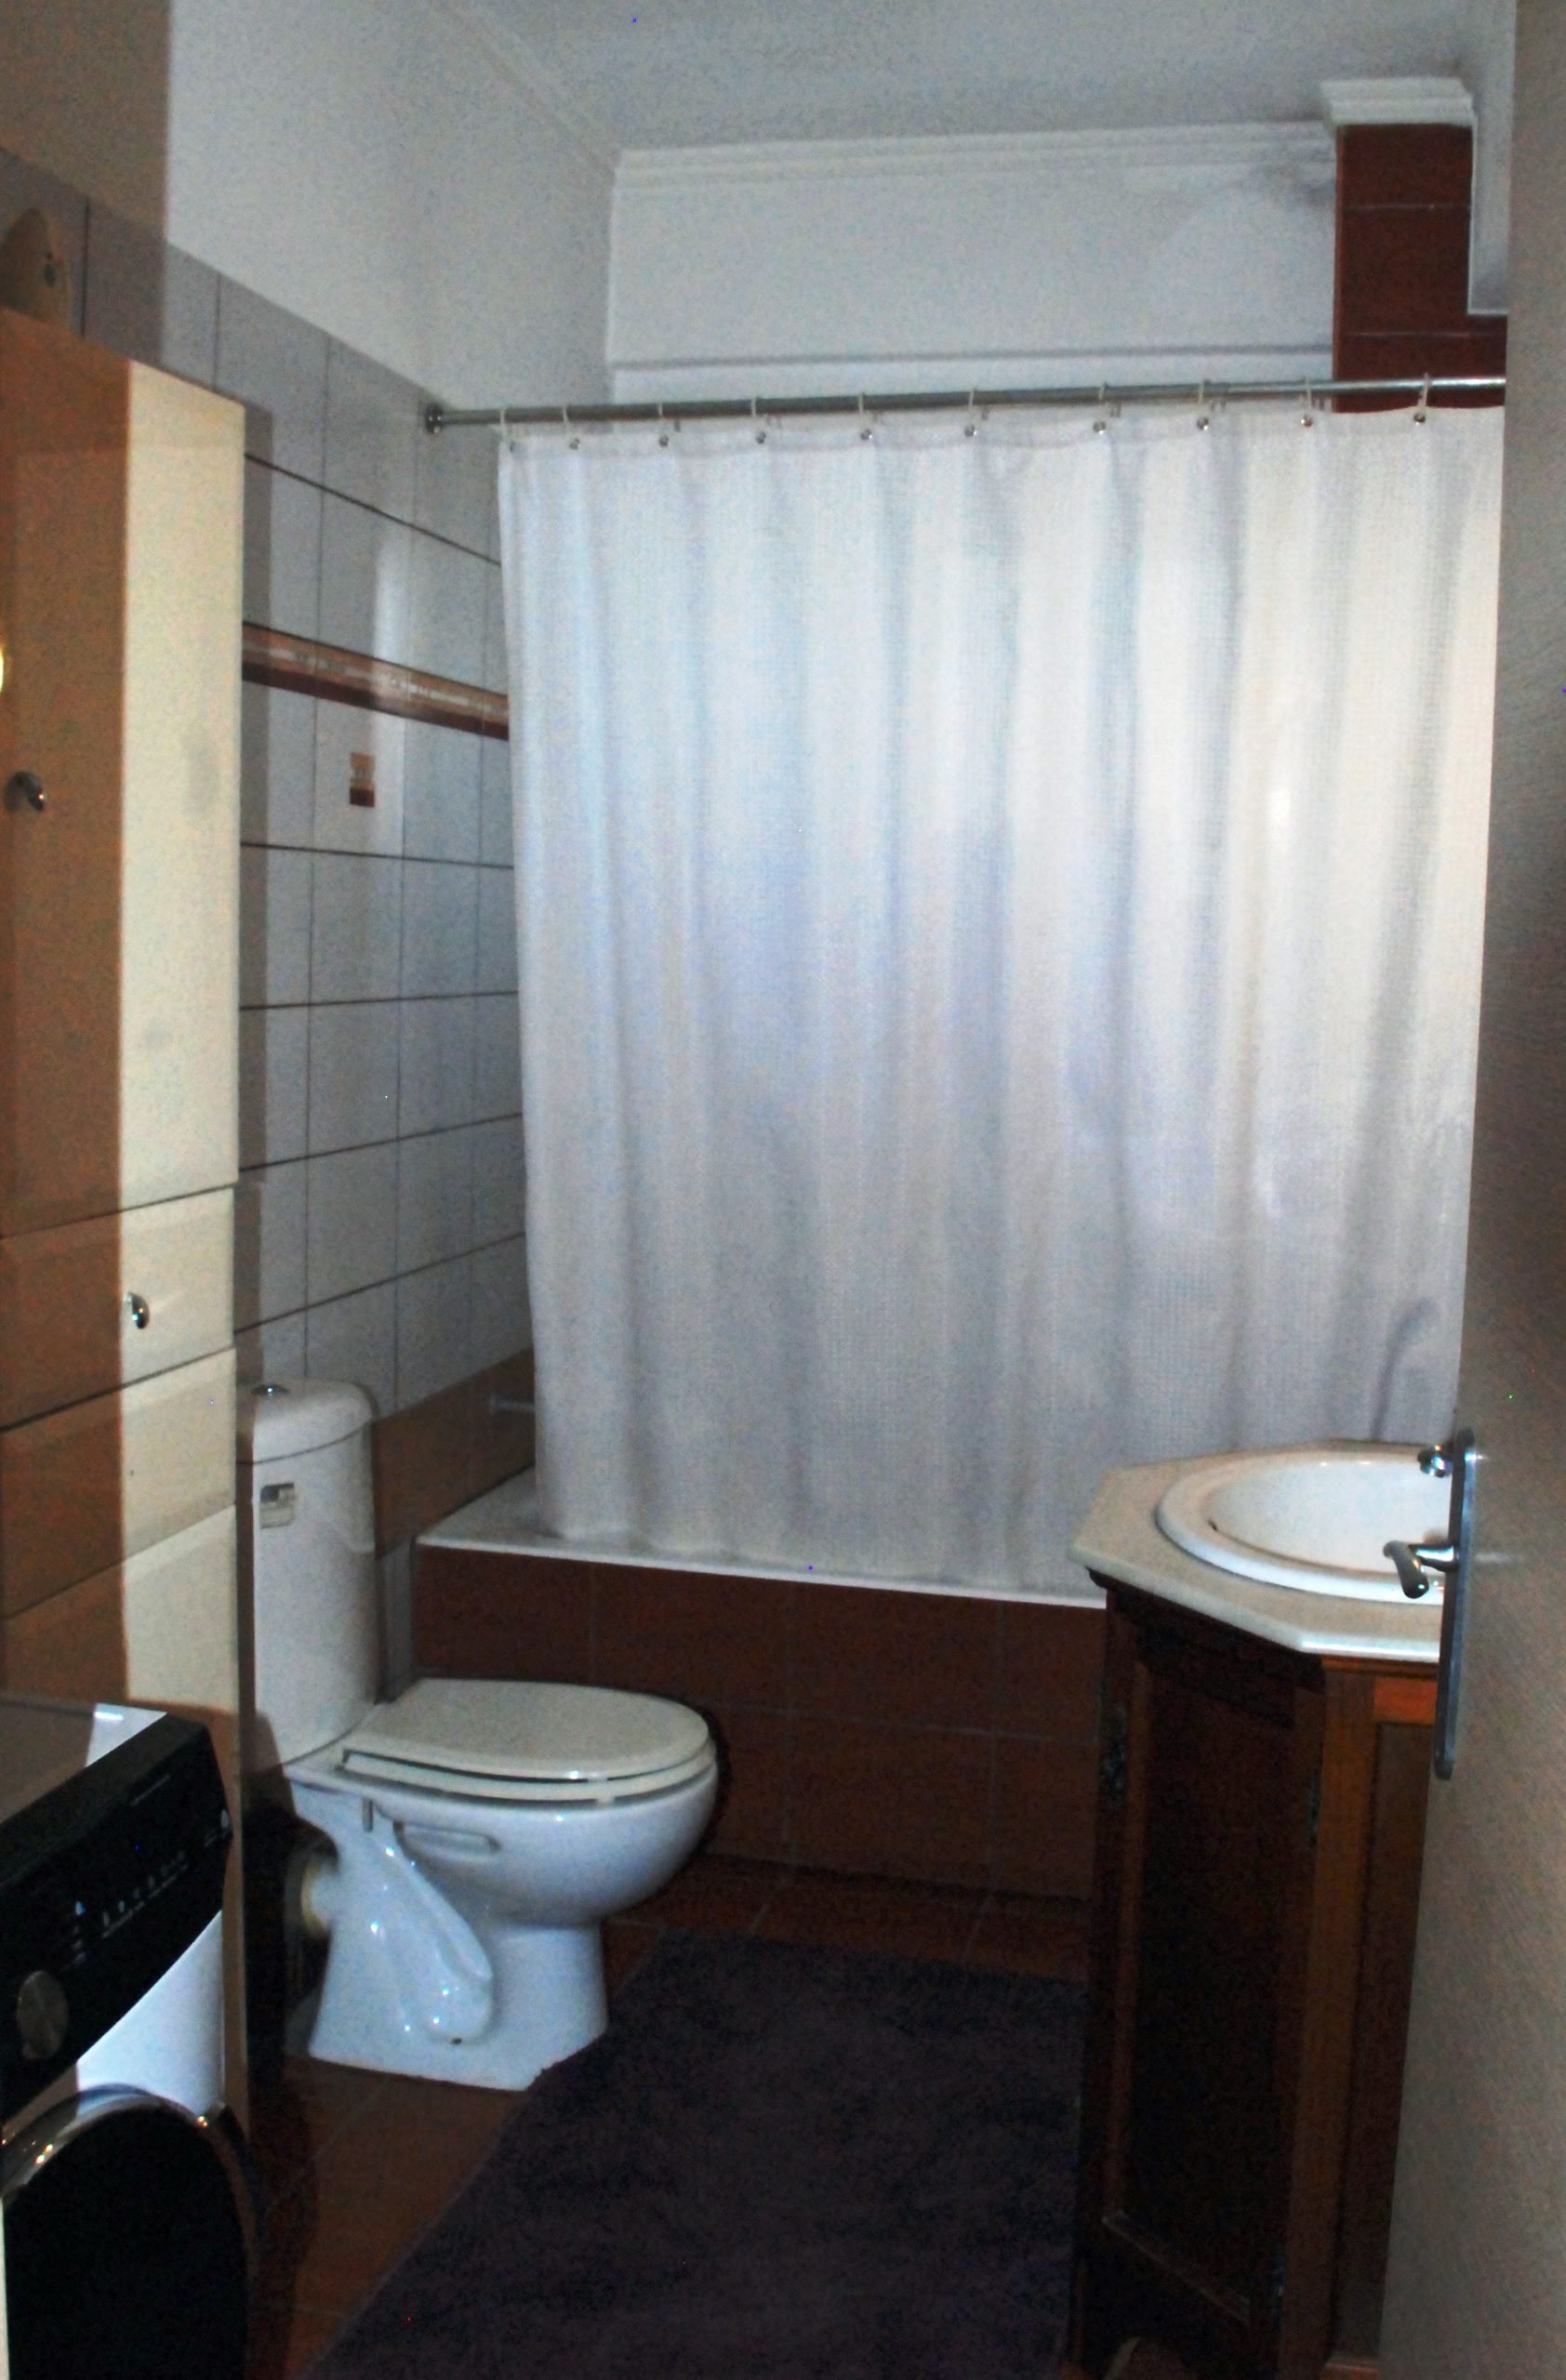 Bathroom of house for sale in Patra Greece, Patra